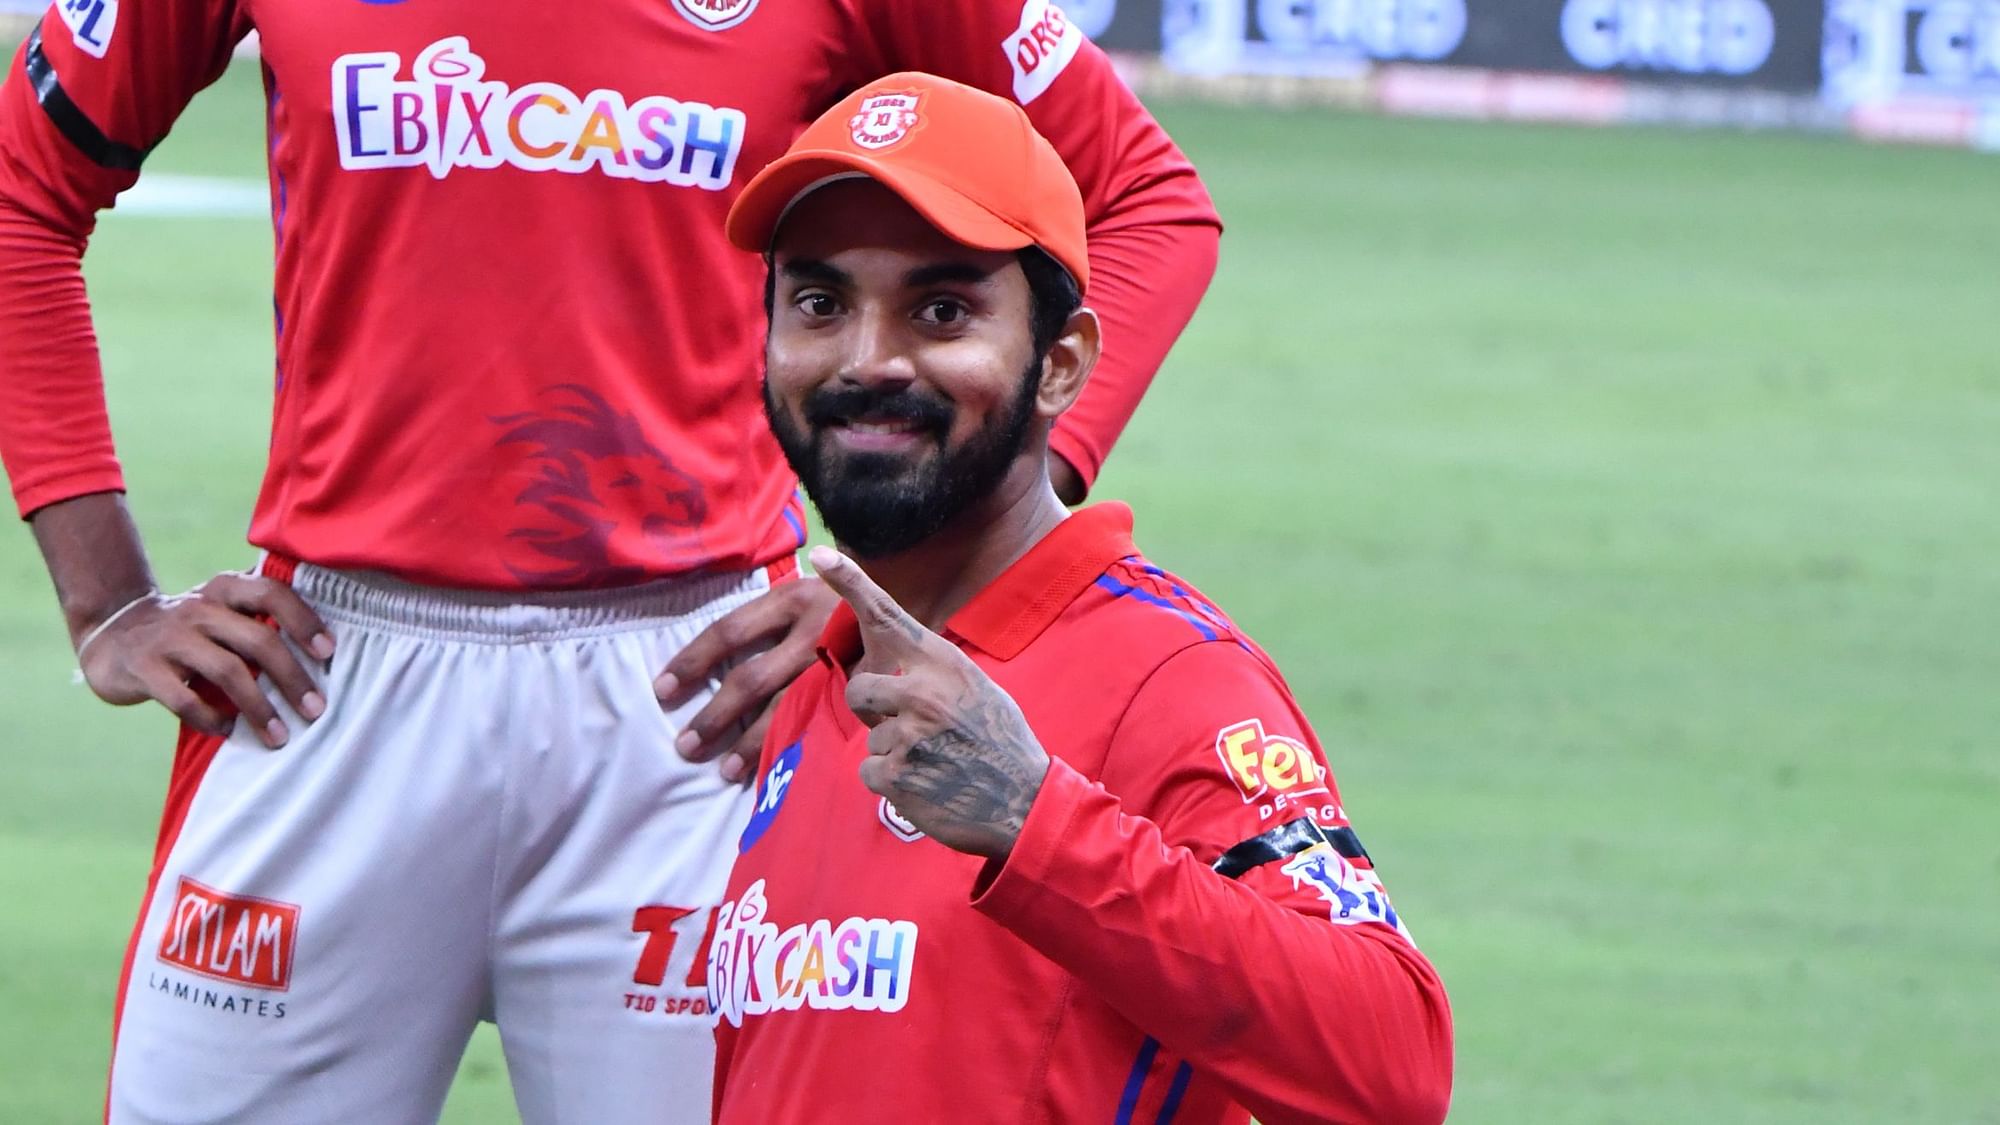 Kings XI Punjab have now won their last four games on the trot after going five games without a win in the first half of the league.